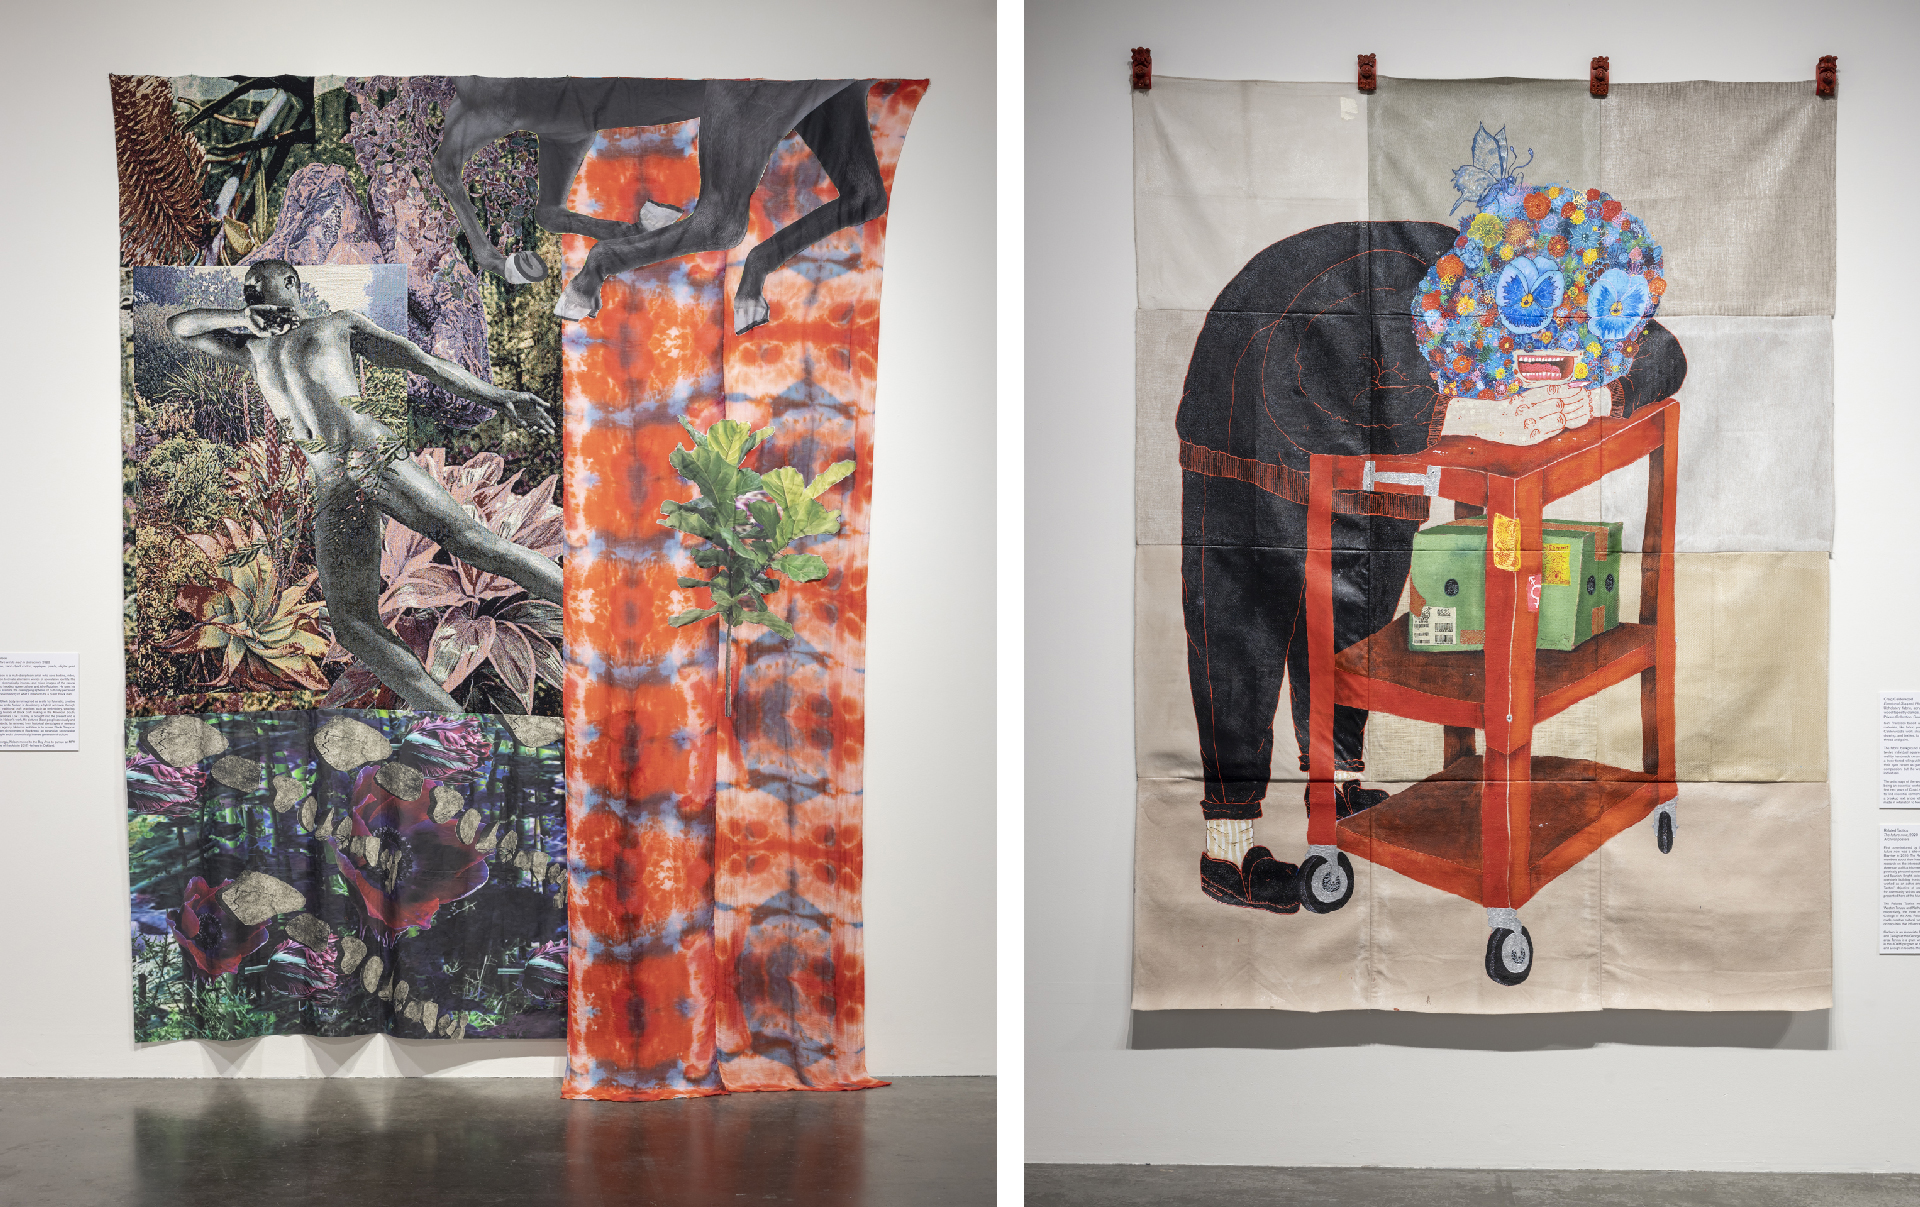 Two wall-hanging textile works in composite image, one ornate and flowery, the other a figure leaning on a cart